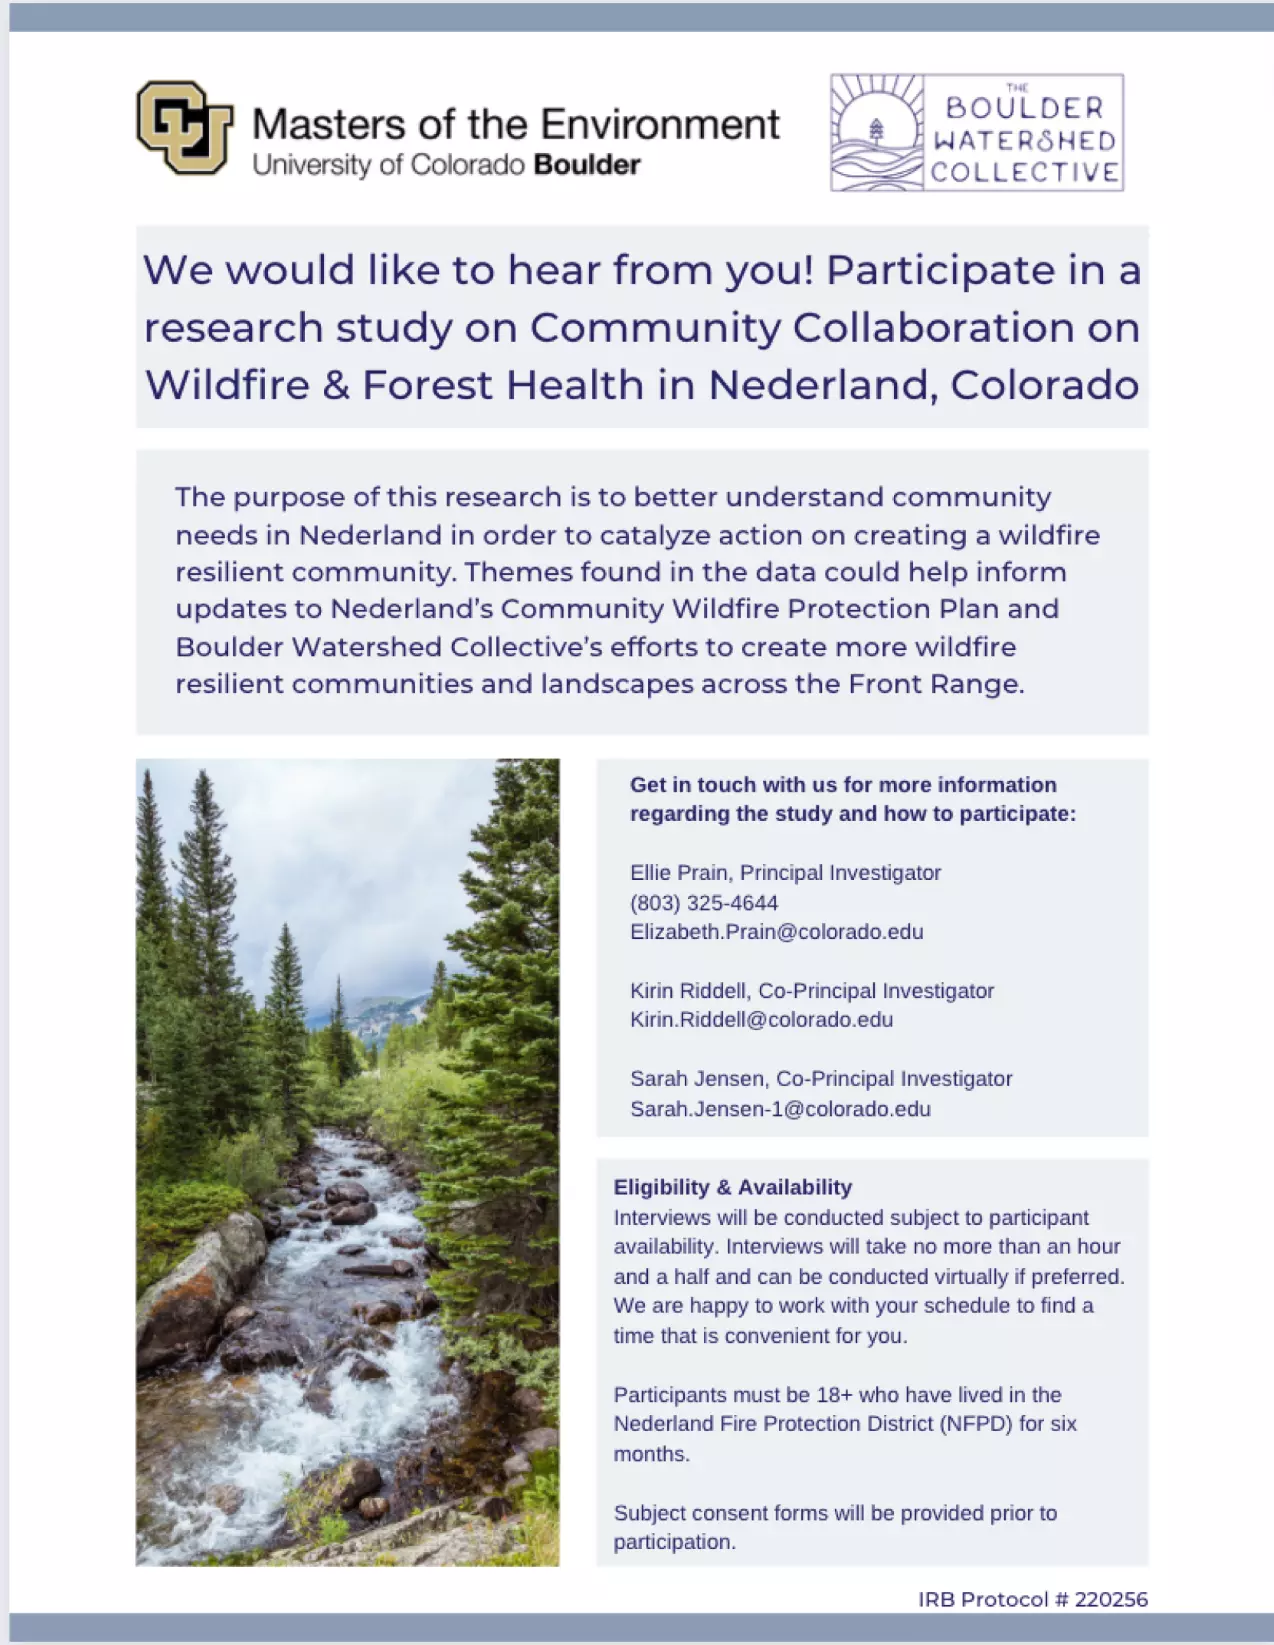 Community Collaboration on Wildfire & Forest Health Reasearch Study Flyer